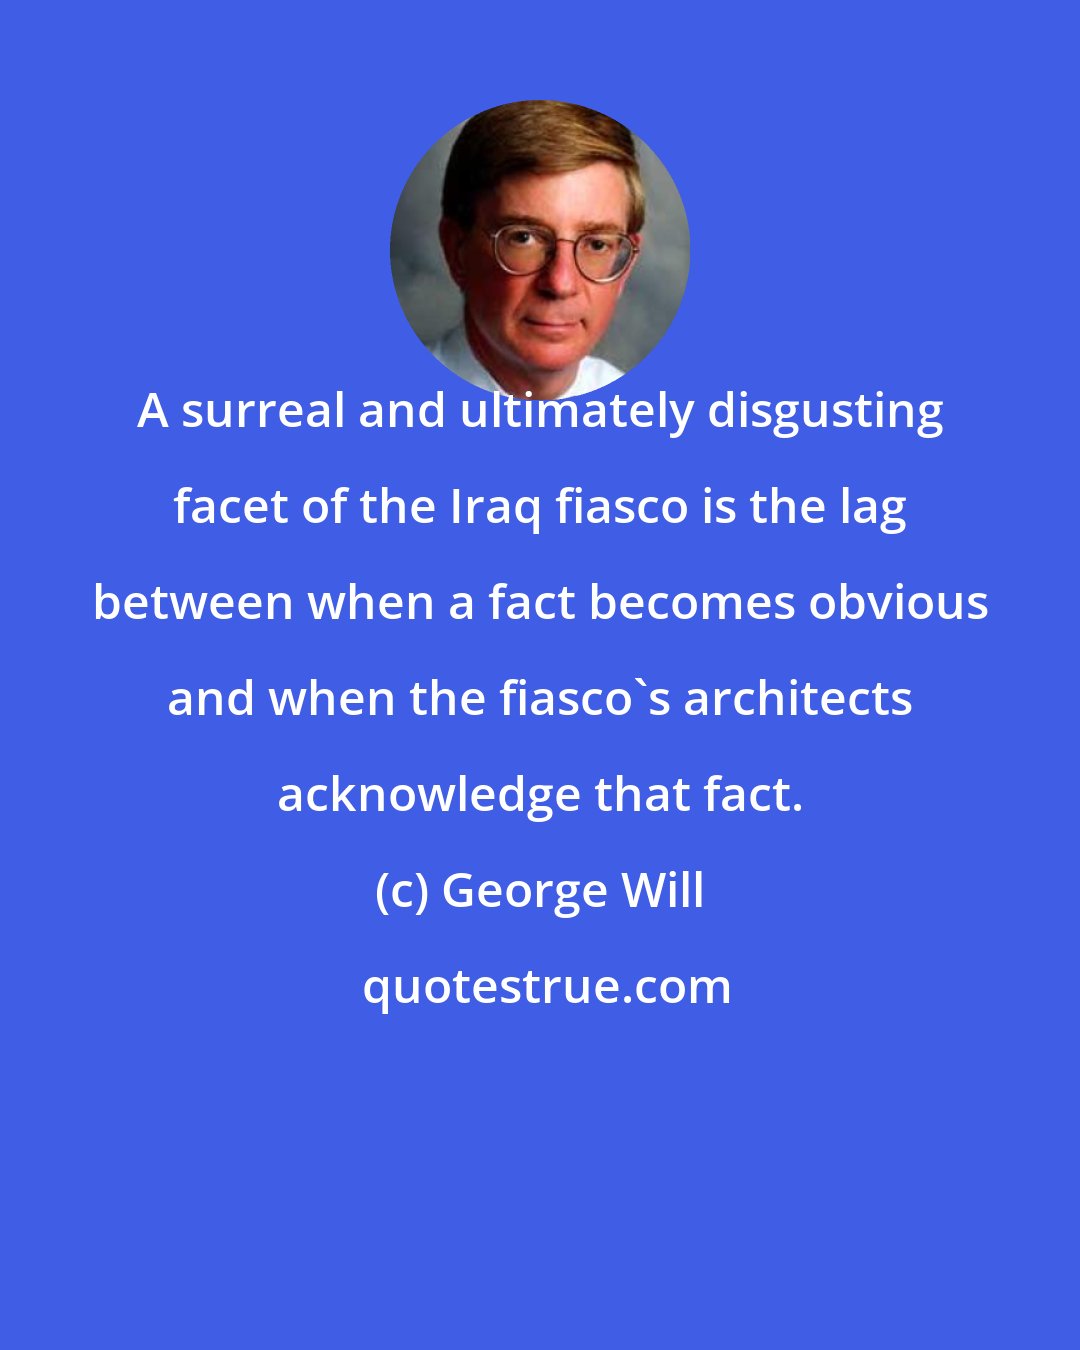 George Will: A surreal and ultimately disgusting facet of the Iraq fiasco is the lag between when a fact becomes obvious and when the fiasco's architects acknowledge that fact.